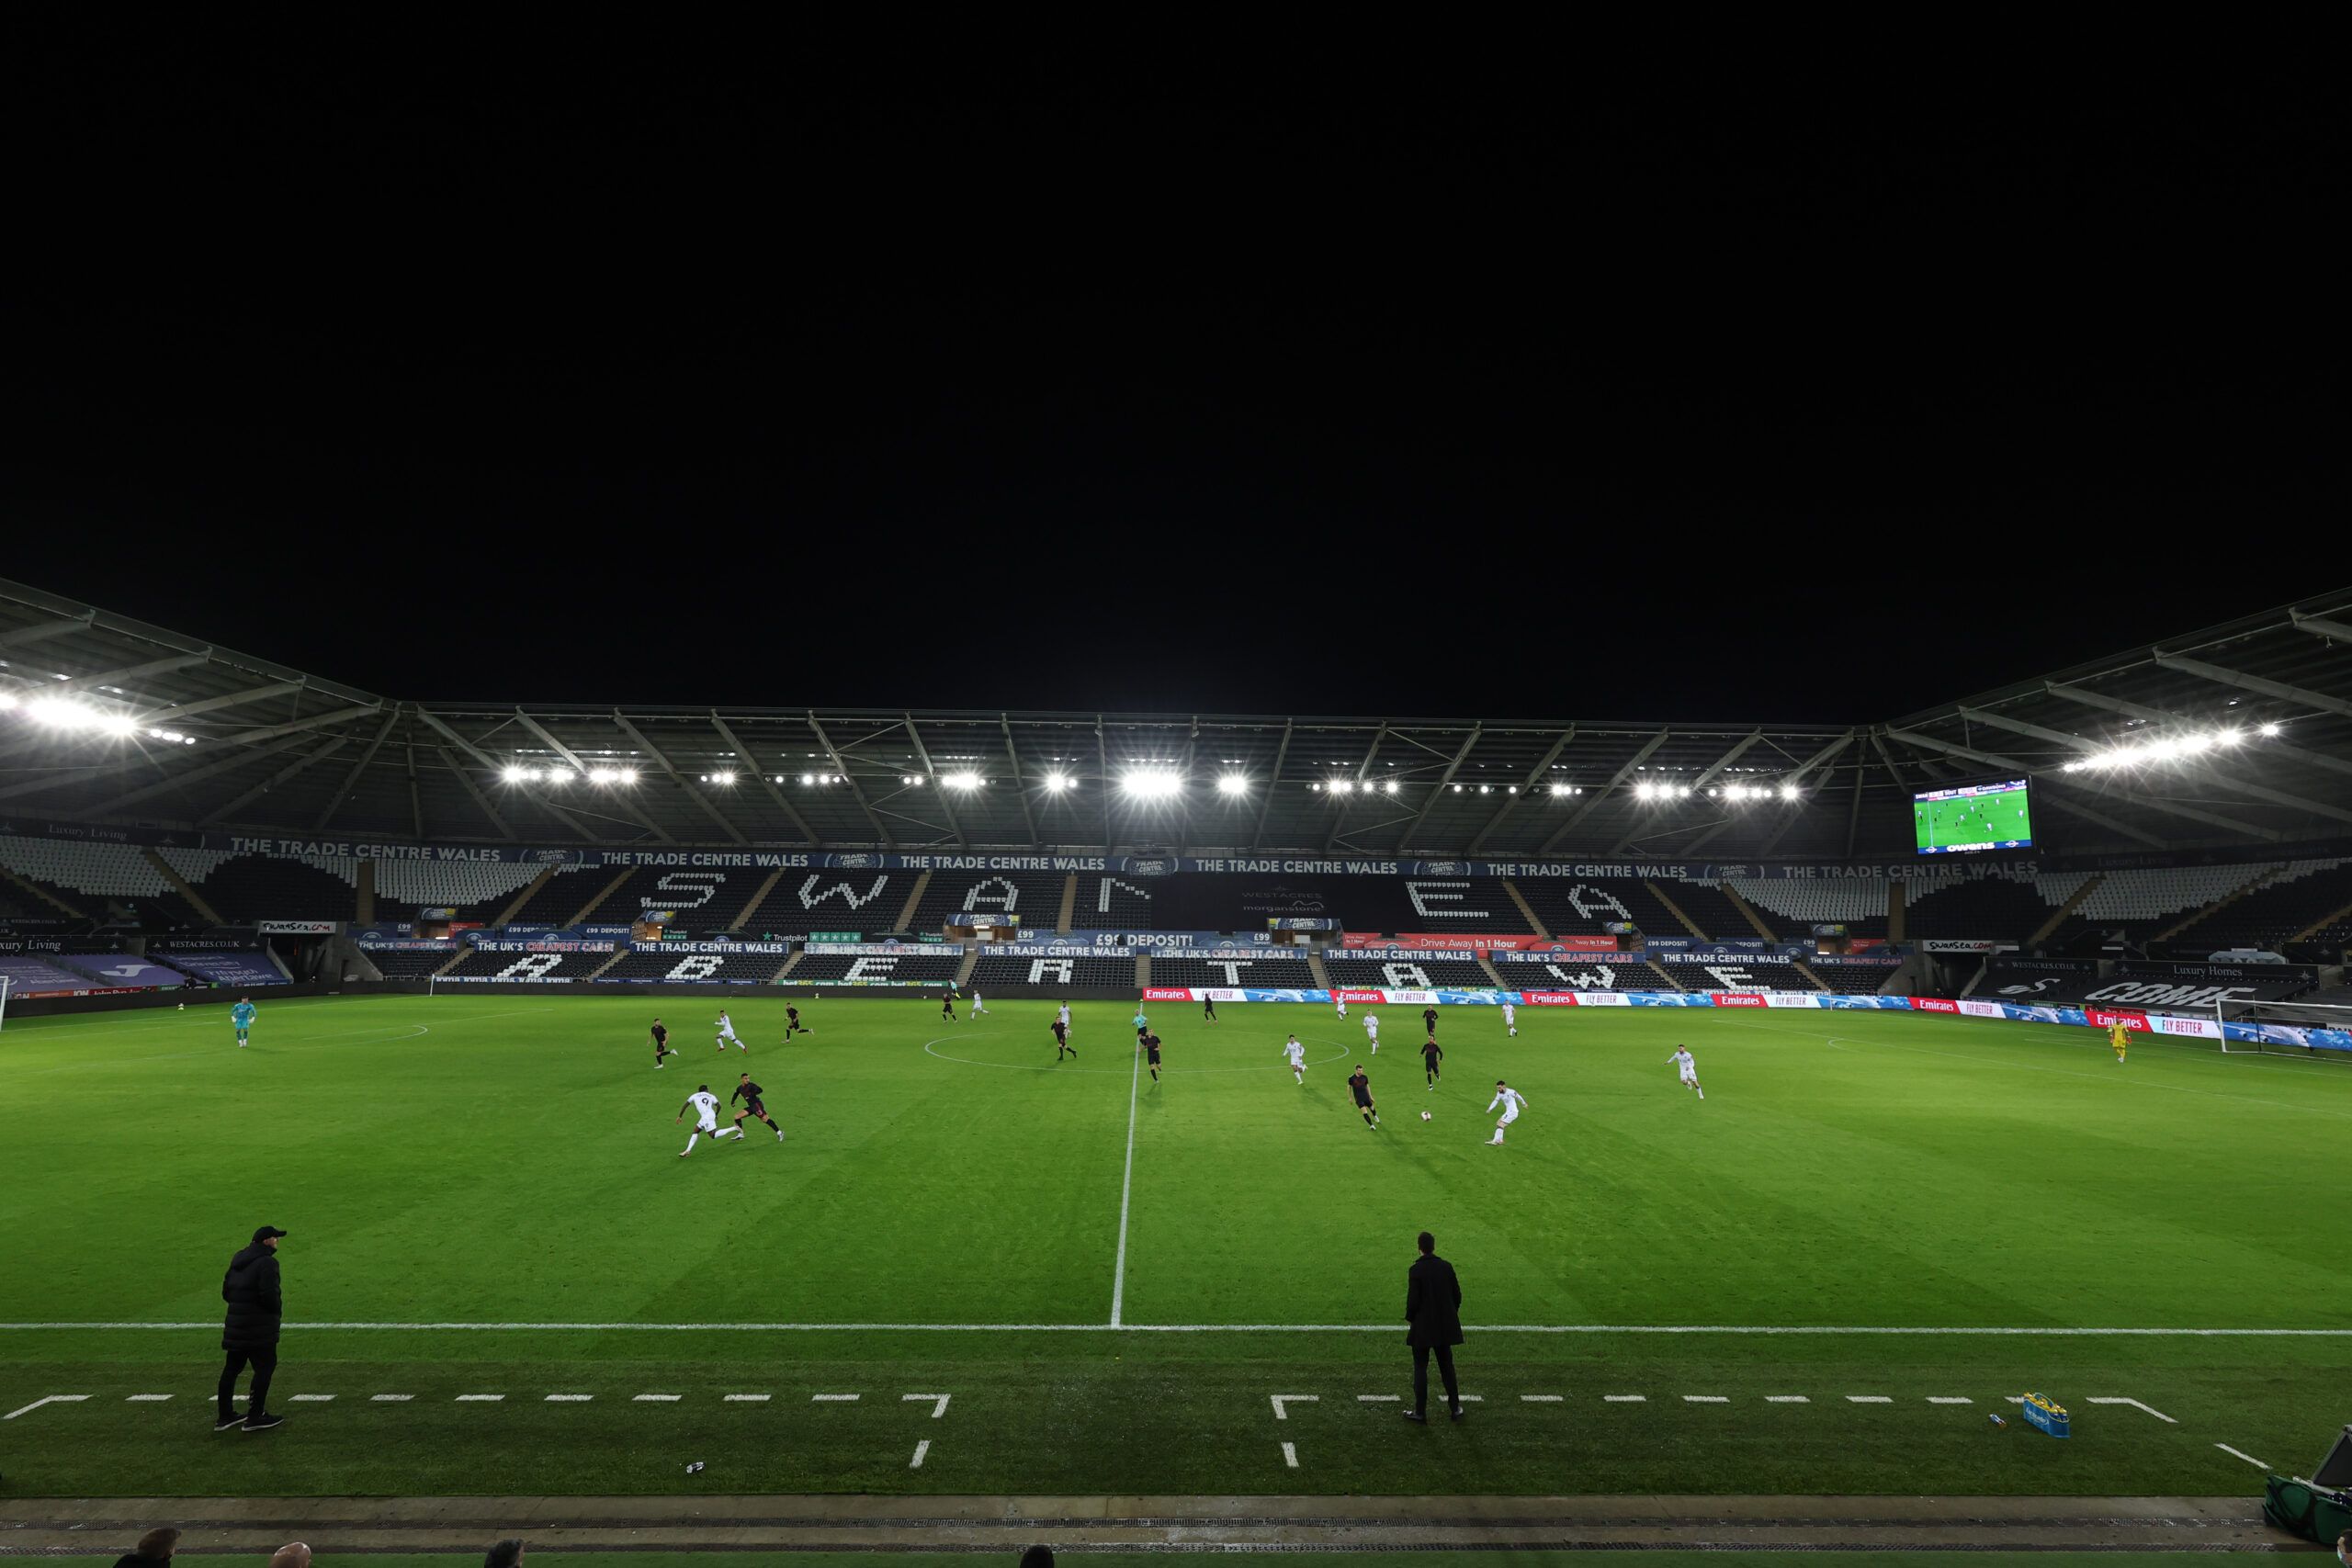 Soccer Football - FA Cup Third Round - Swansea City v Southampton - Swansea.com Stadium, Swansea, Wales, Britain - January 8, 2022 General view during the match Action Images via Reuters/Matthew Childs